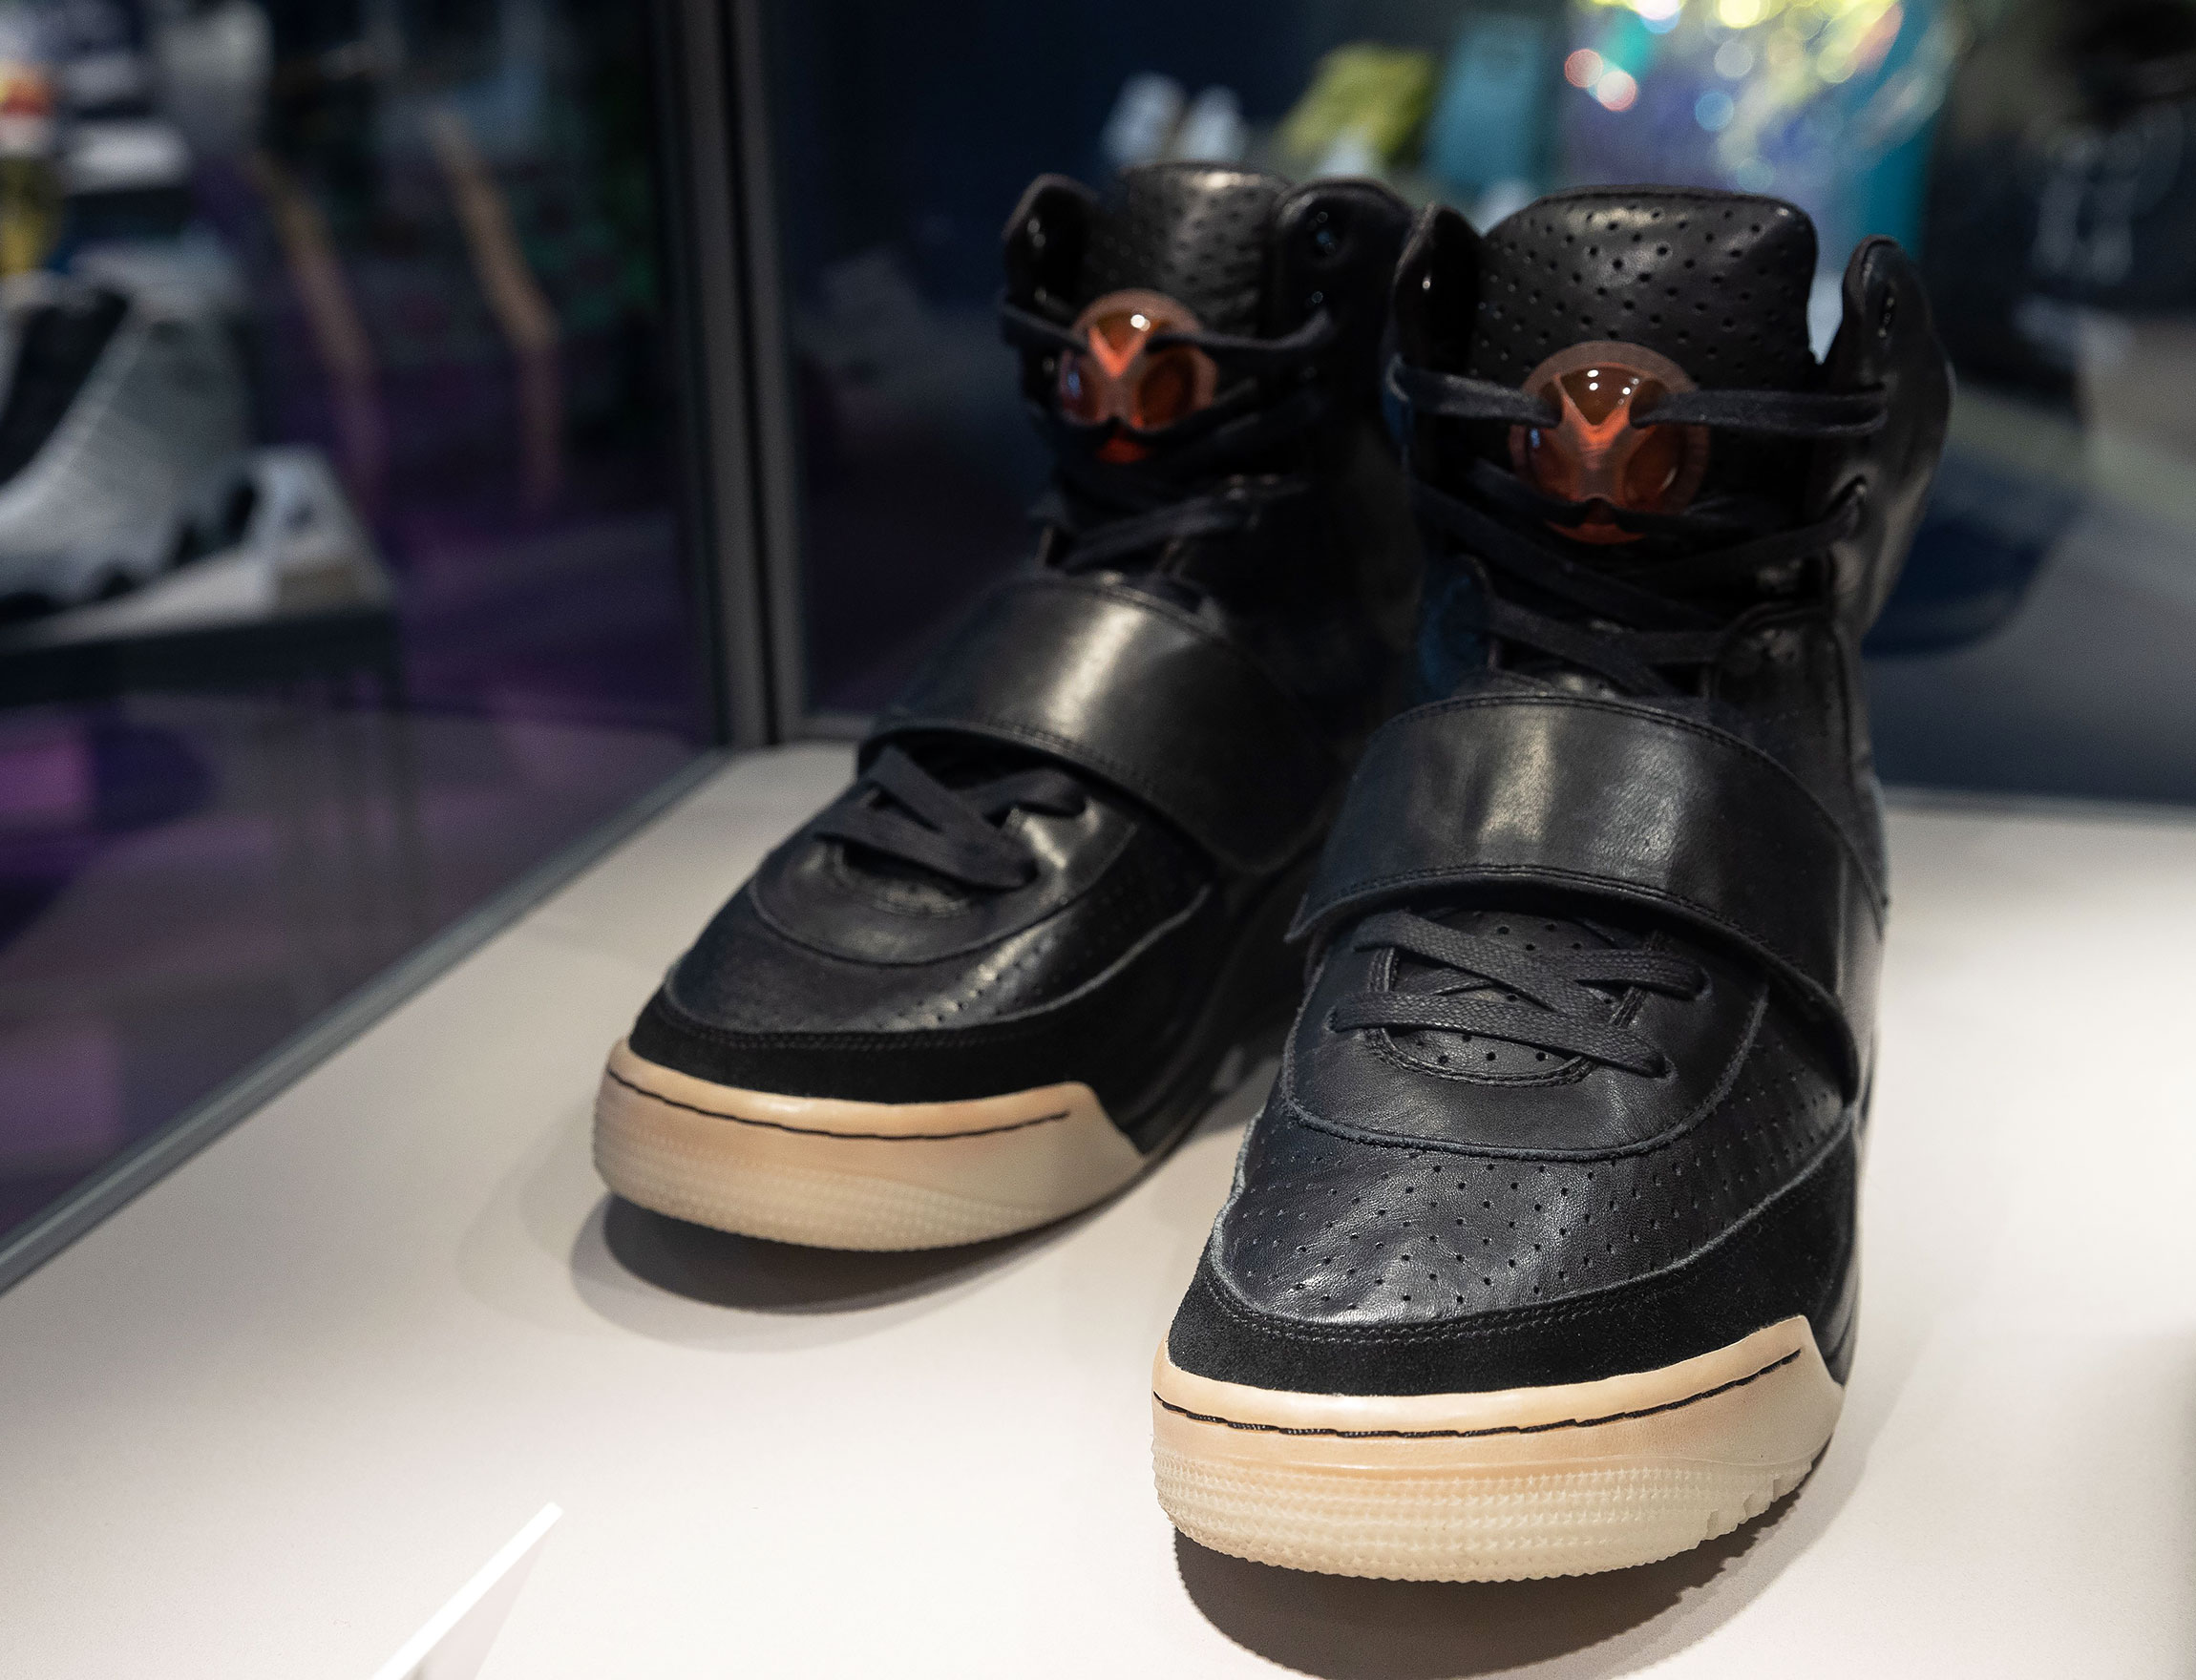 Kanye West's Nike Air Yeezy 1 Prototype Sells for $1.8 Million